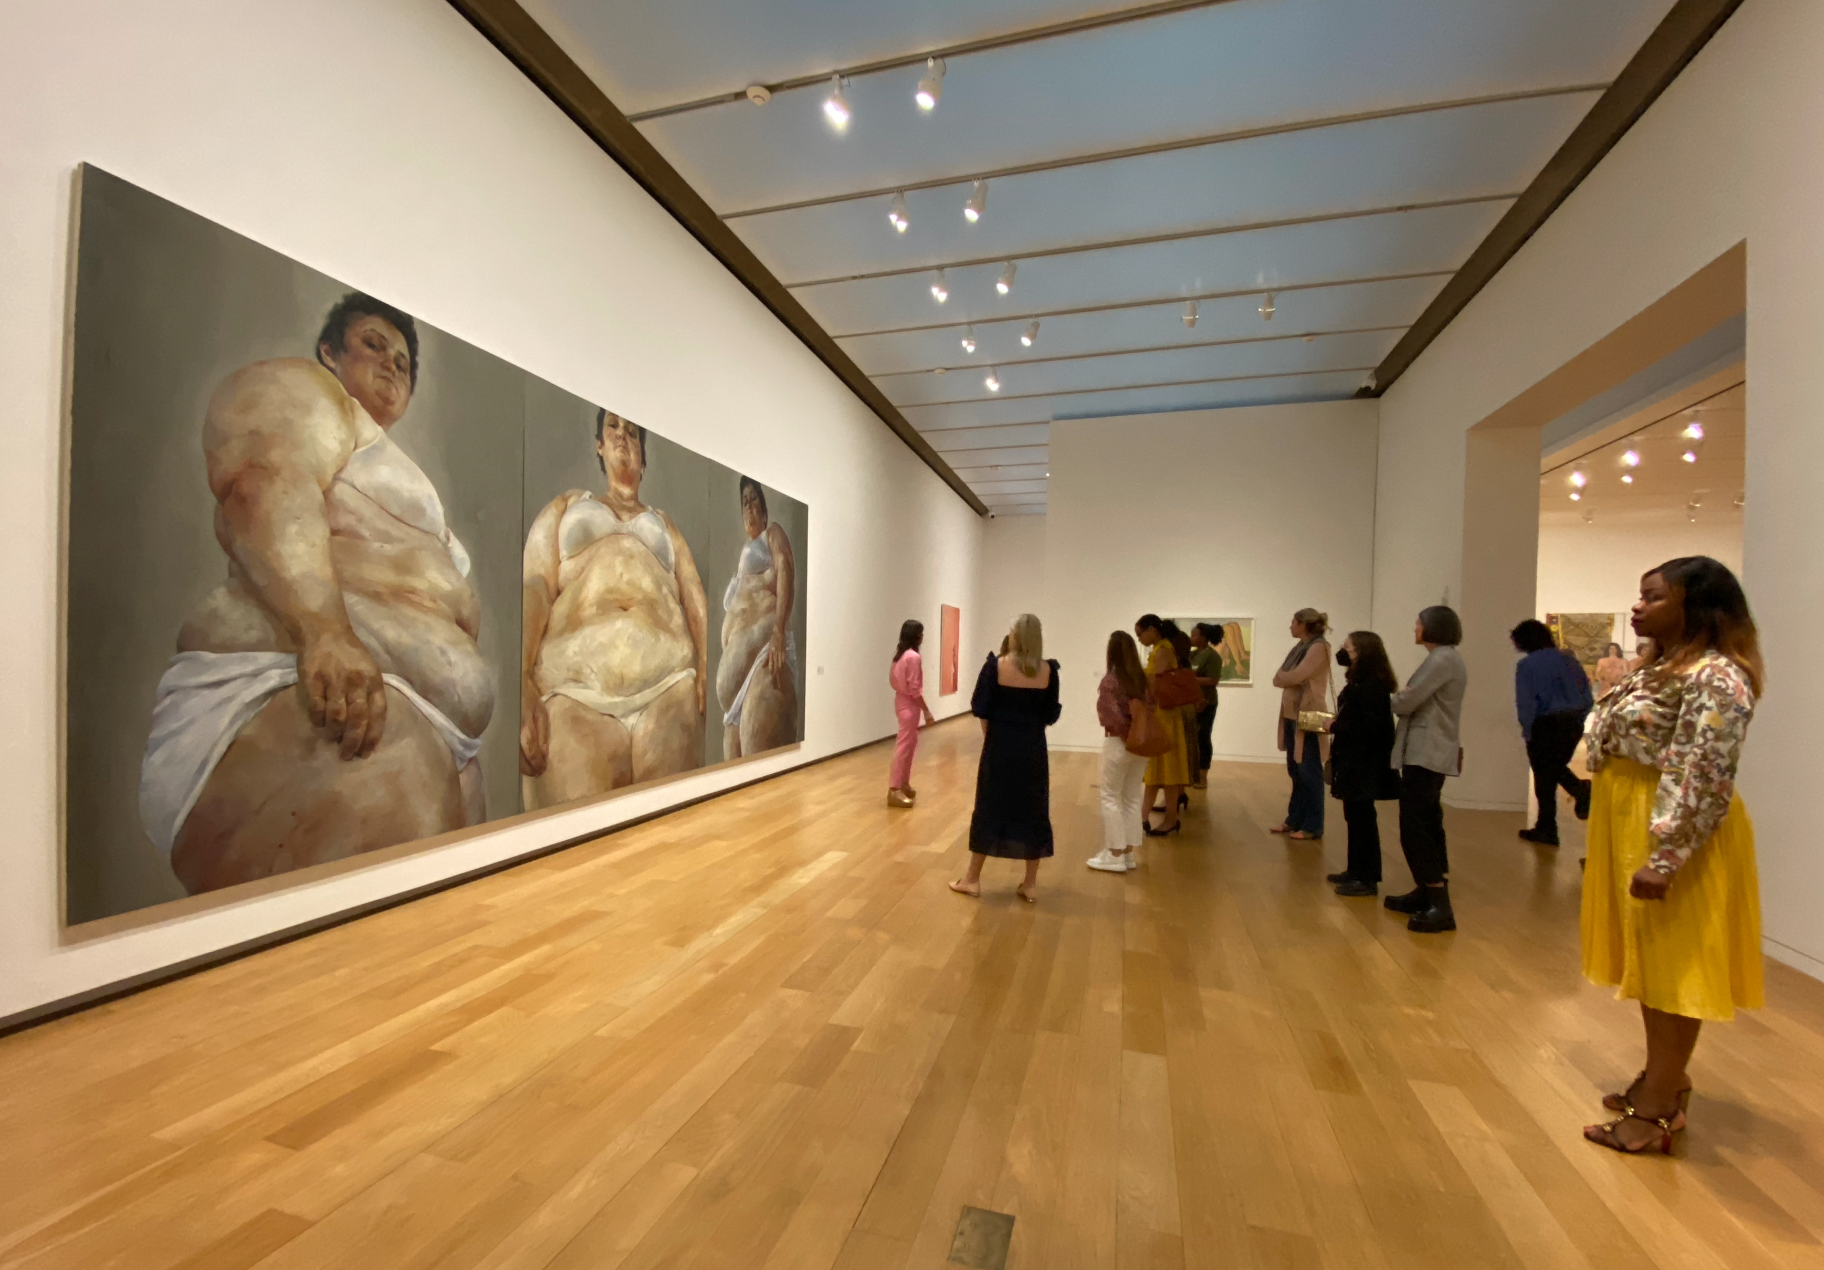 A group faces a large painting by Jenny Saville